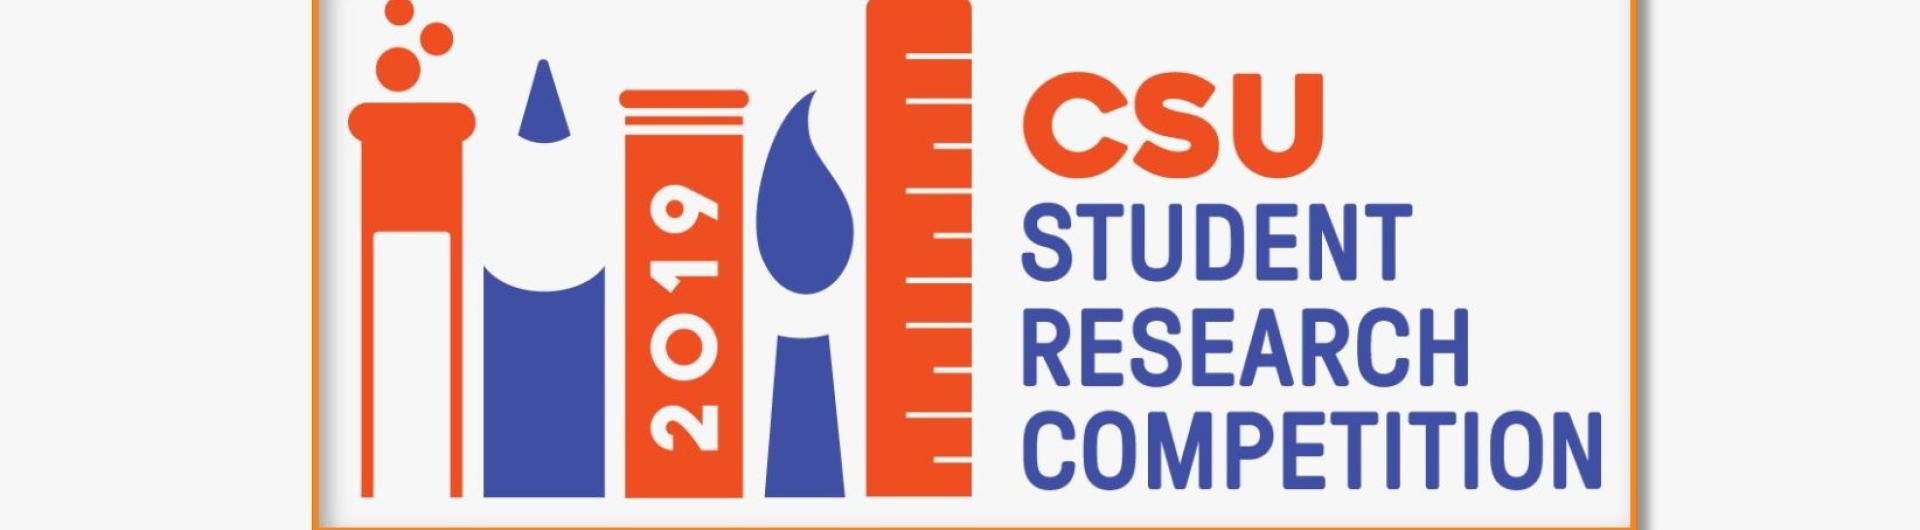 2019 CSU Student Research Competition